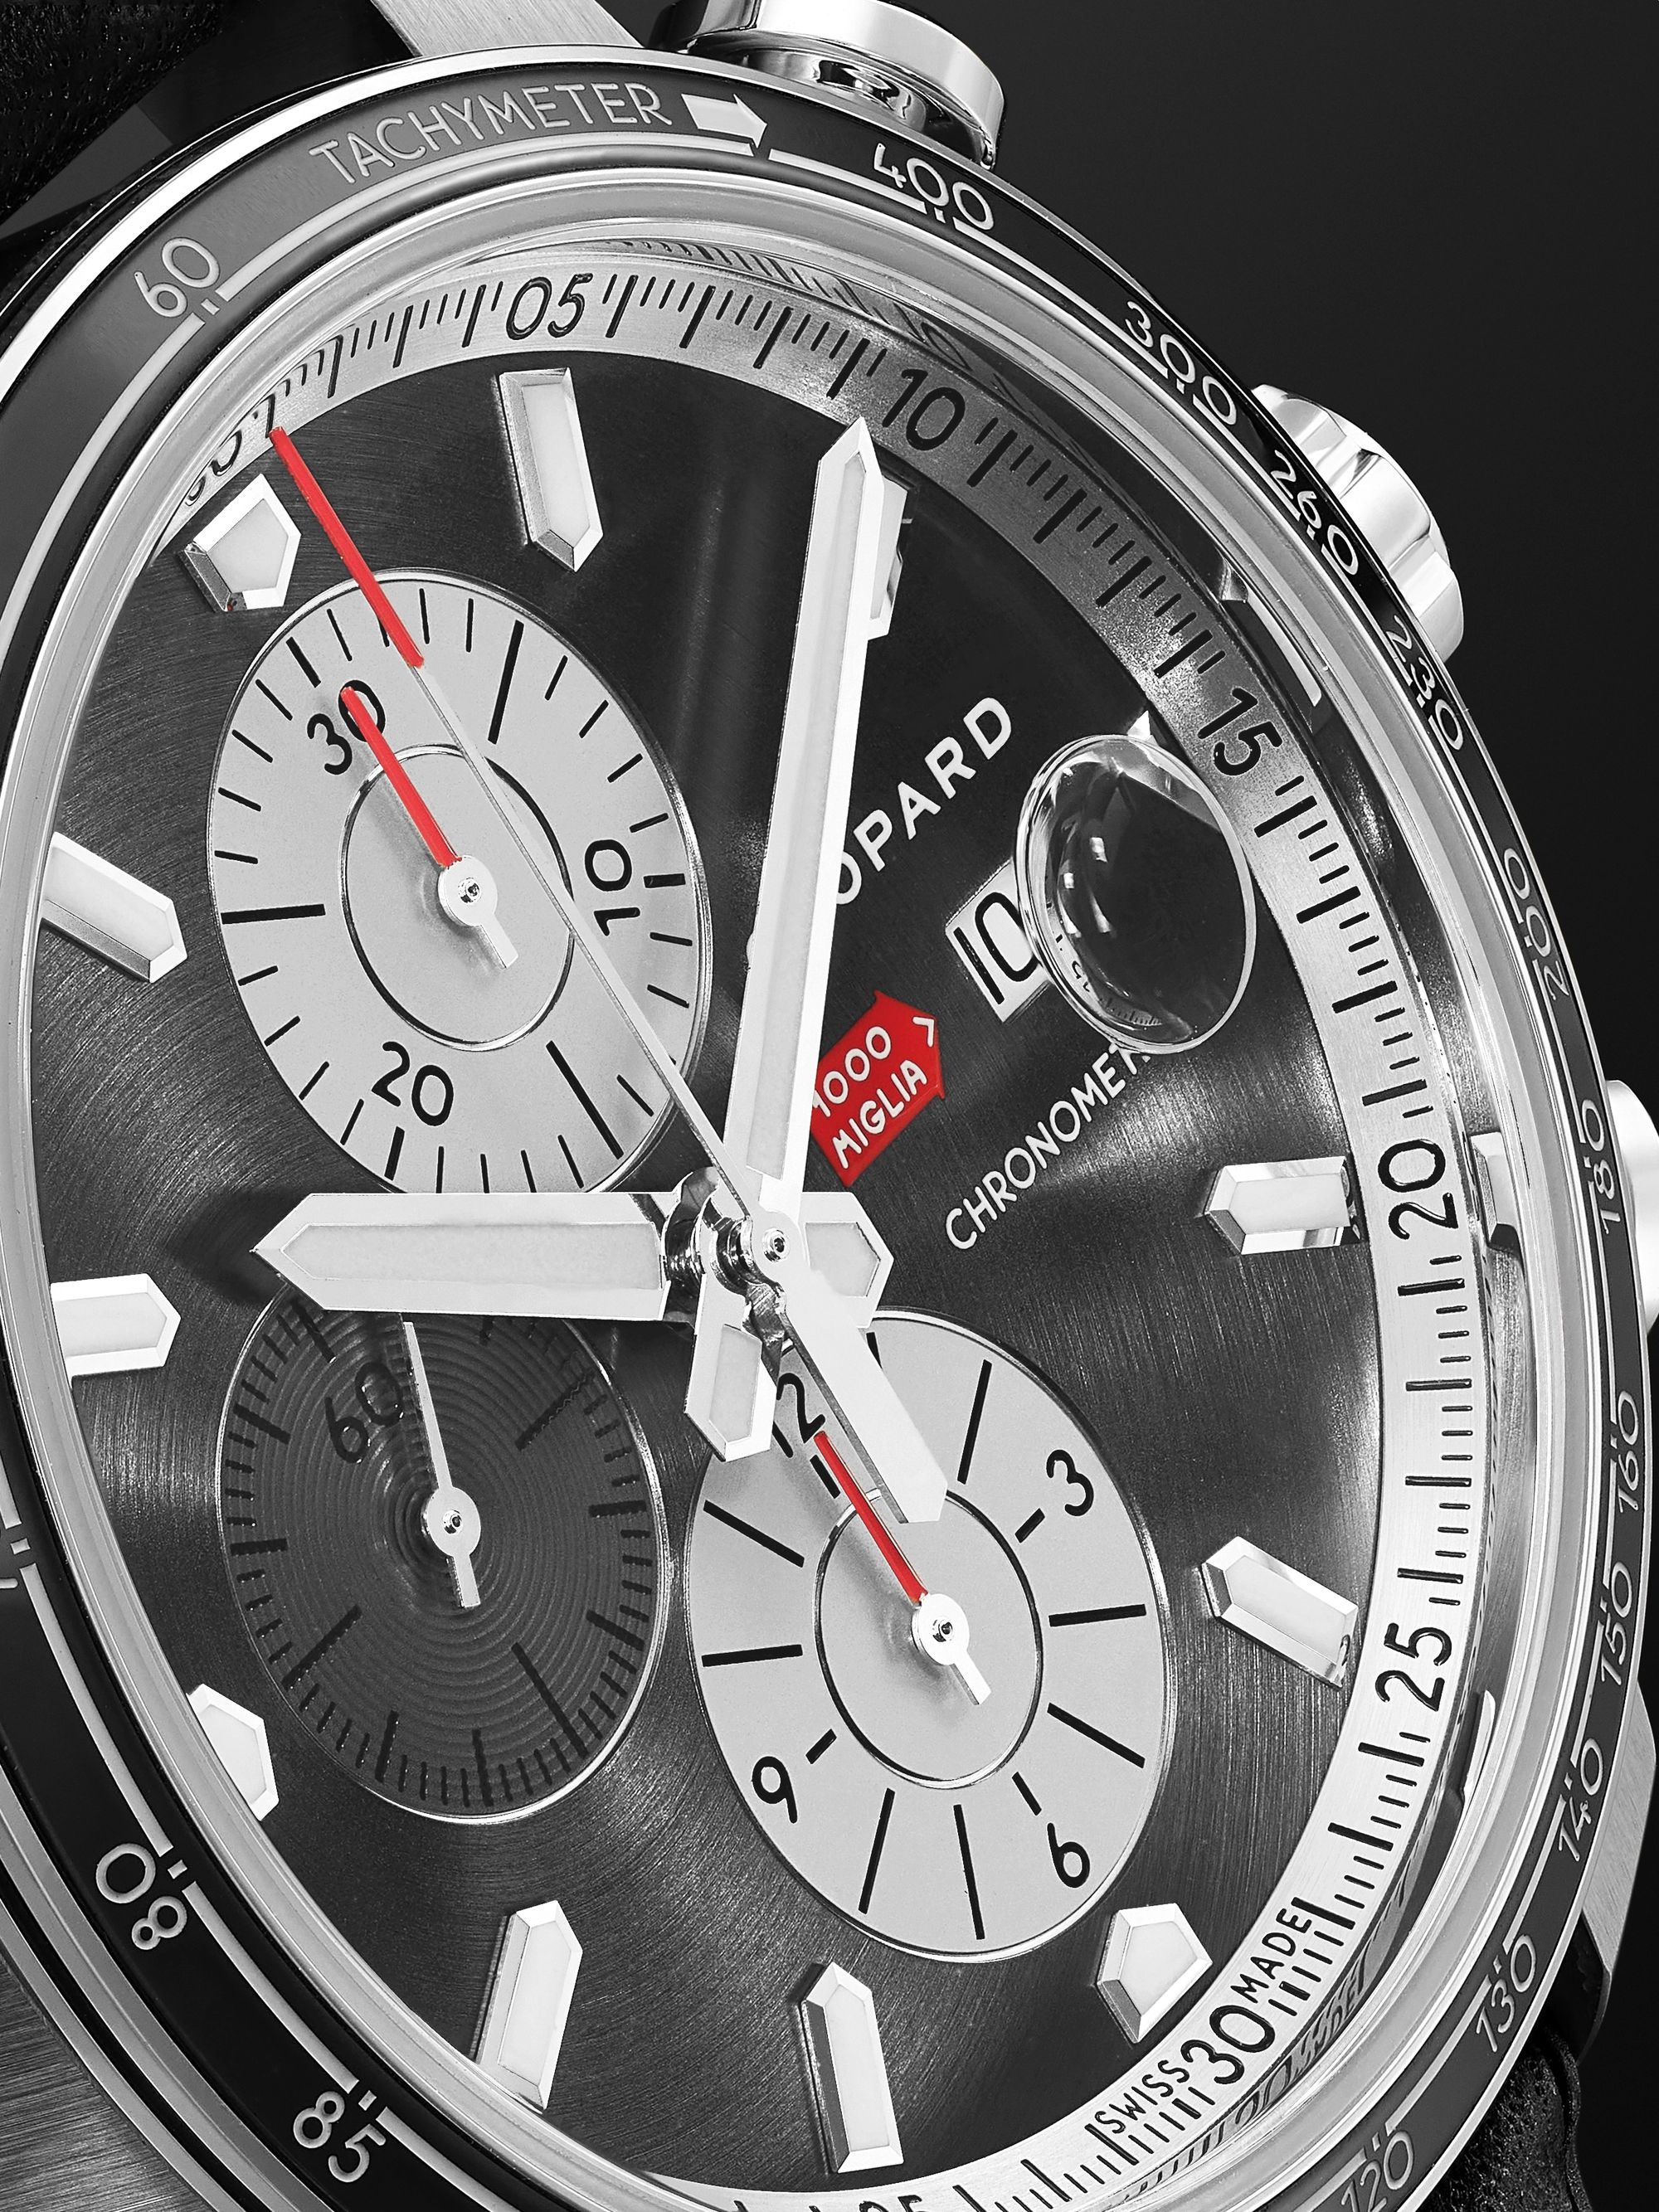 CHOPARD Mille Miglia 2021 Race Edition Limited Edition Automatic Chronograph 44mm Stainless Steel and Leather Watch, Ref. No. 168571-3009